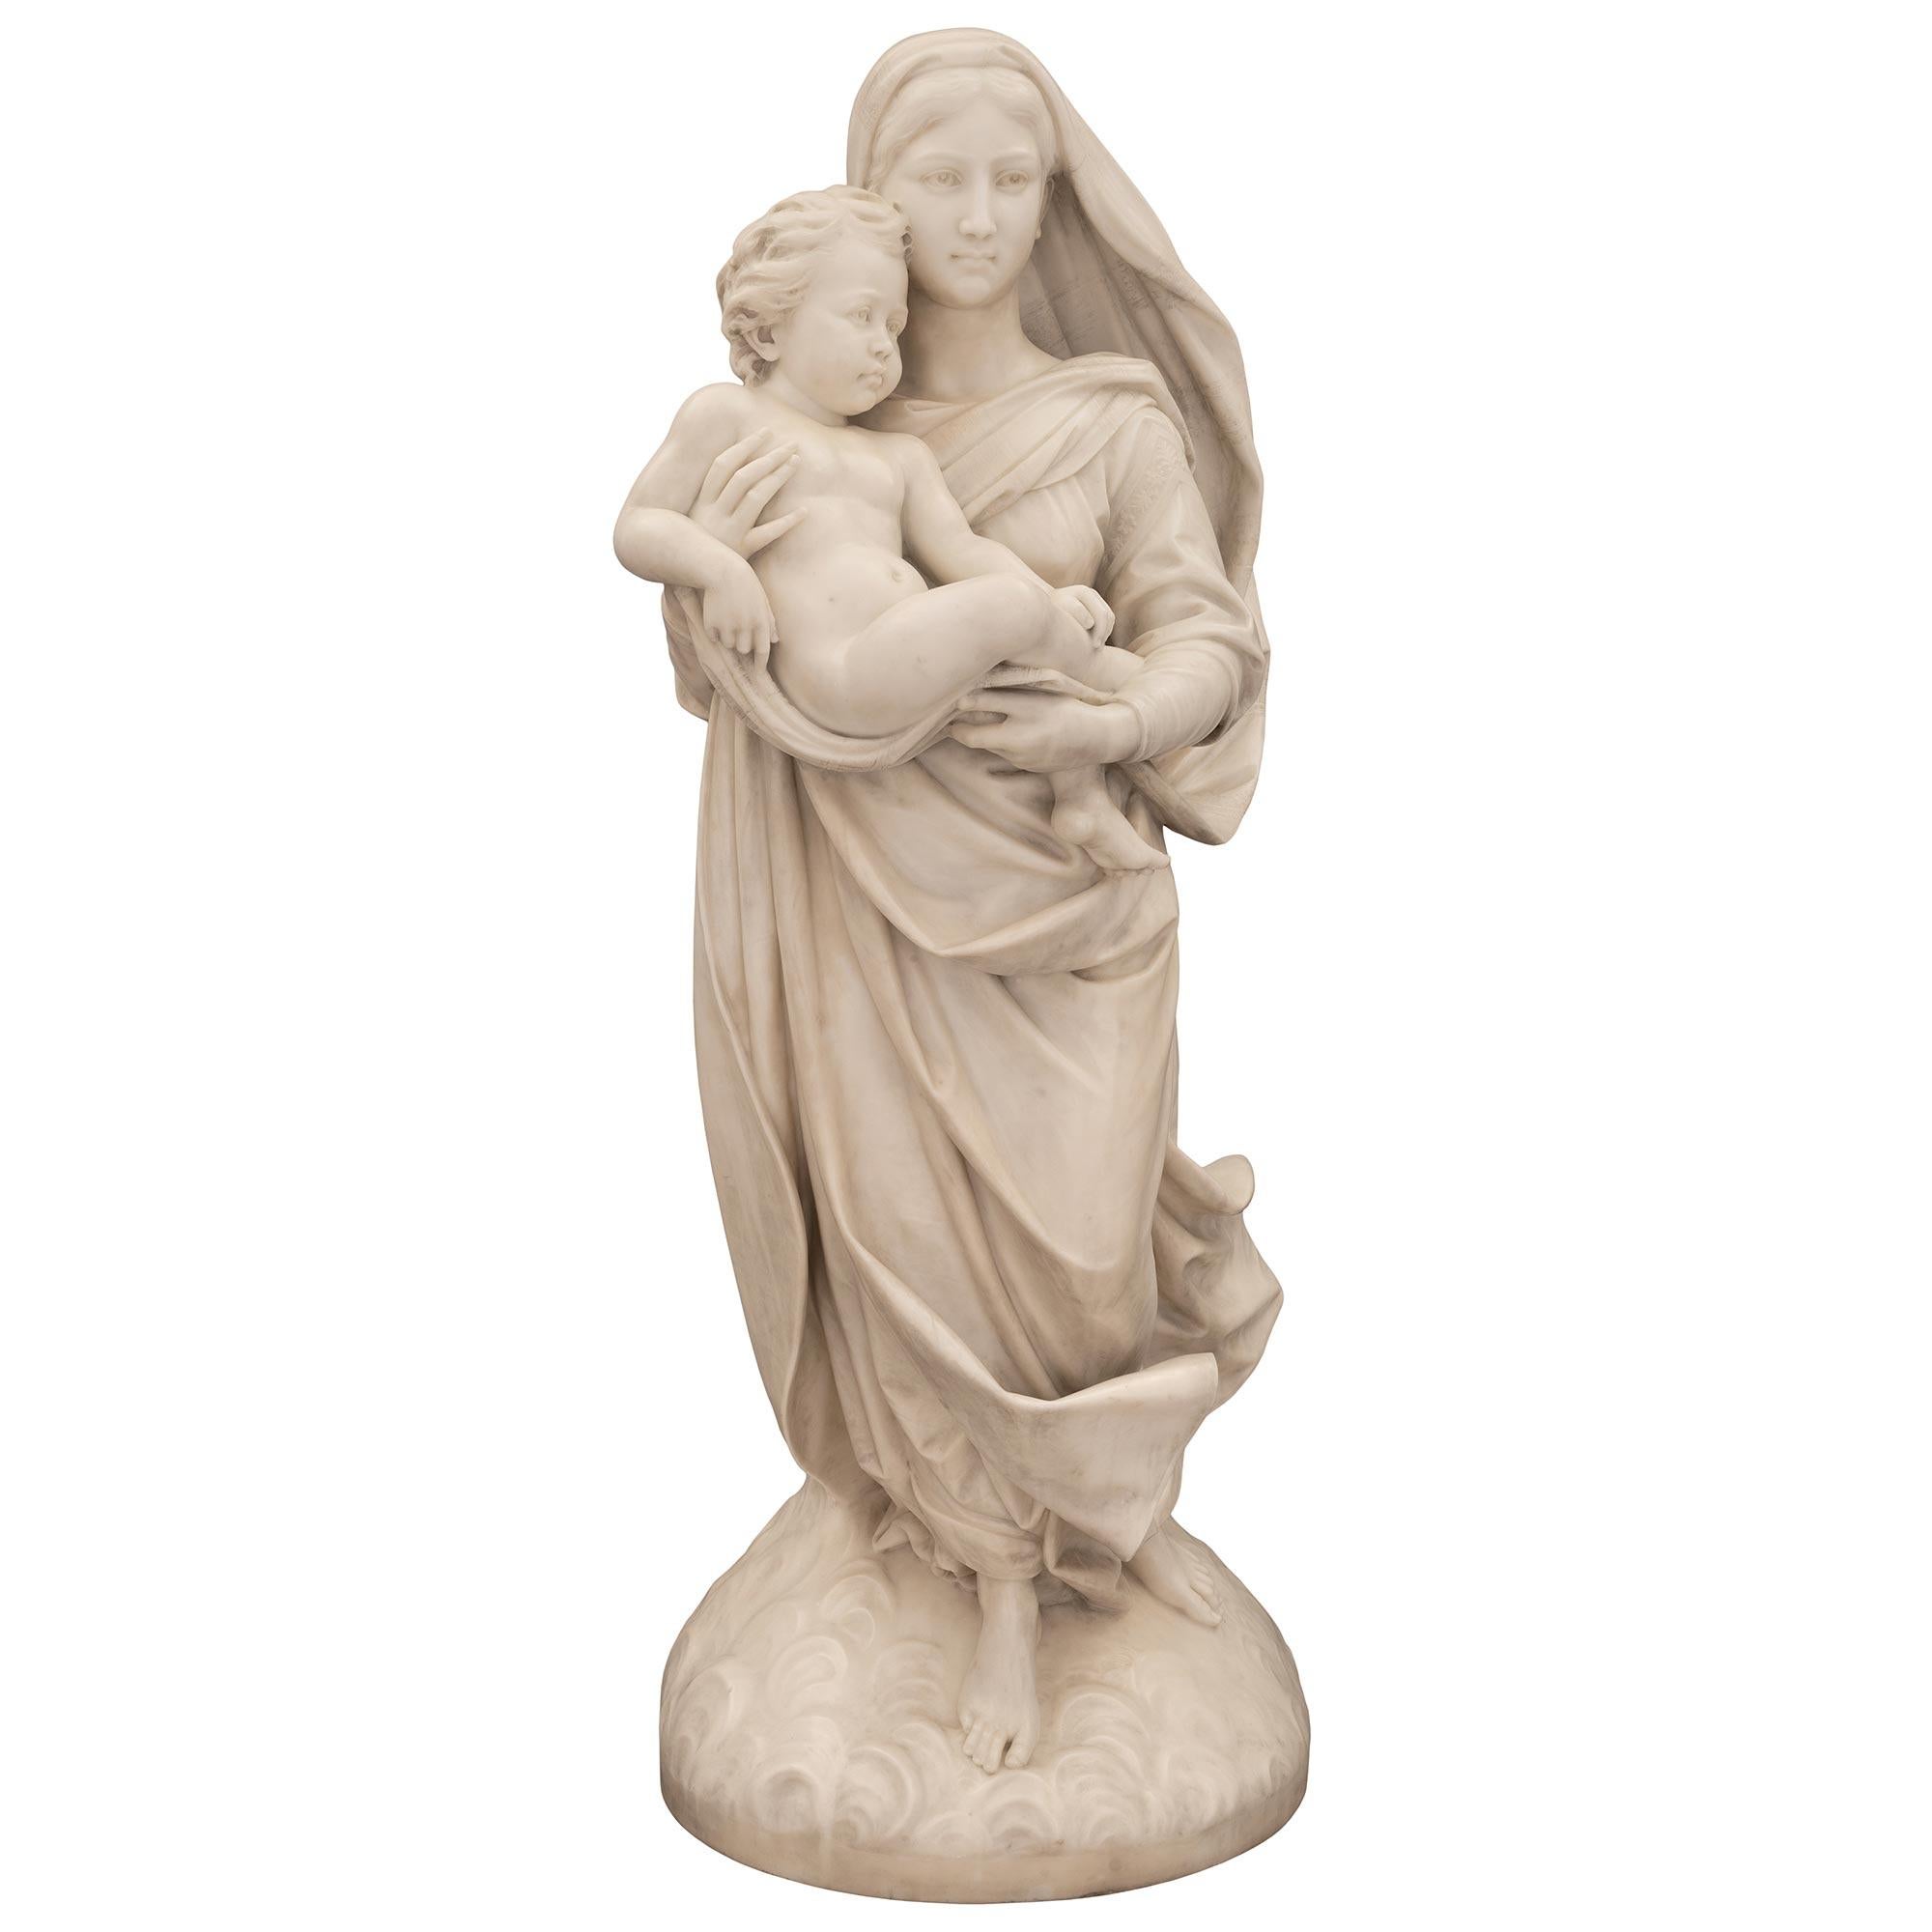 A stunning and most impressive Italian 19th century white Carrara marble life-size statue of Madonna and child. The statue signed Gria Flli Lapini 1895, is raised by a beautiful dome shape base with lovely scrolled flowing cloud like designs. Above